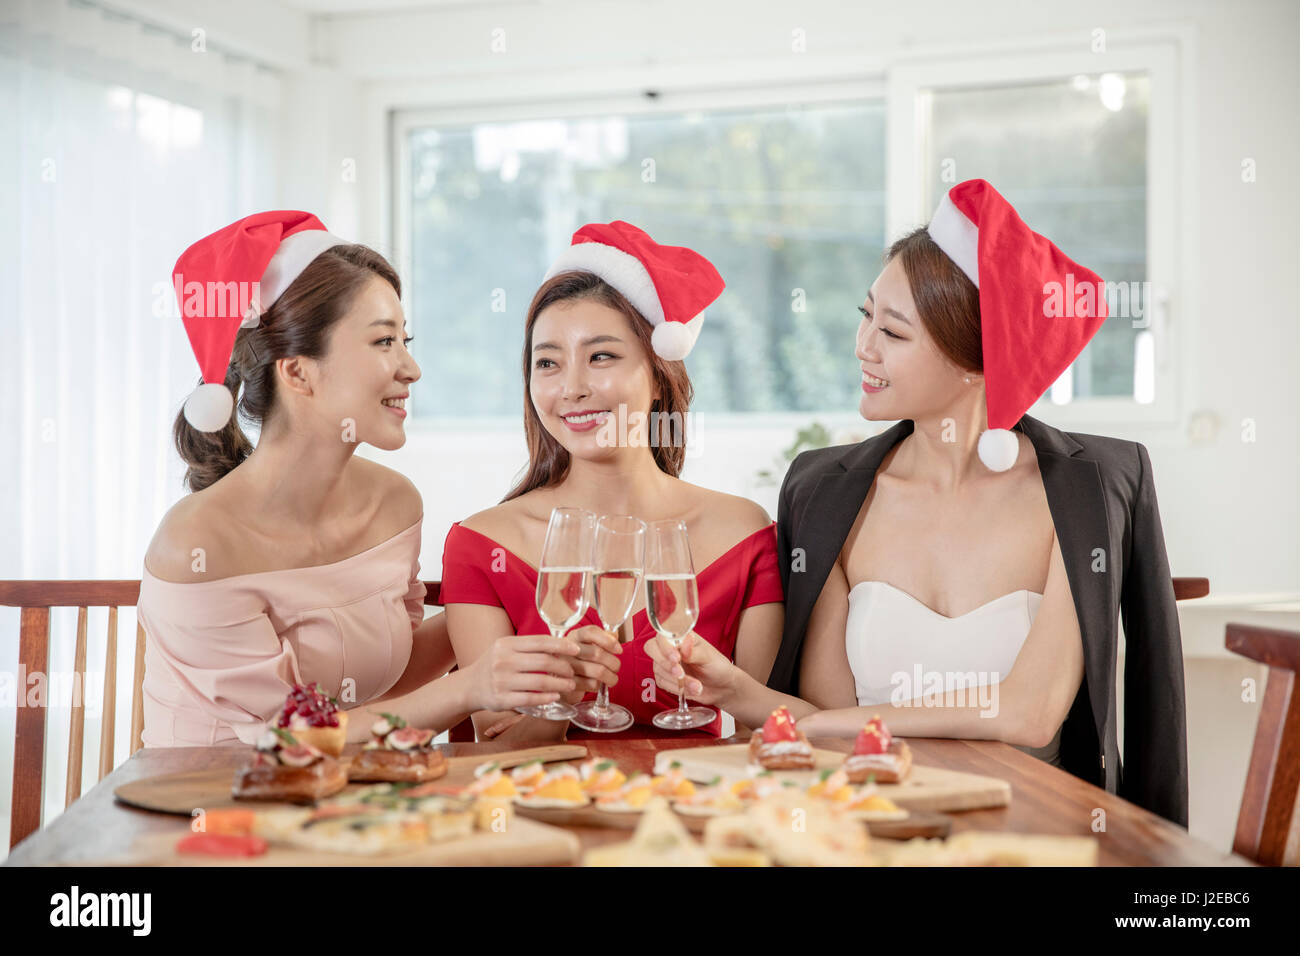 Portrait of three young smiling women at party Stock Photo